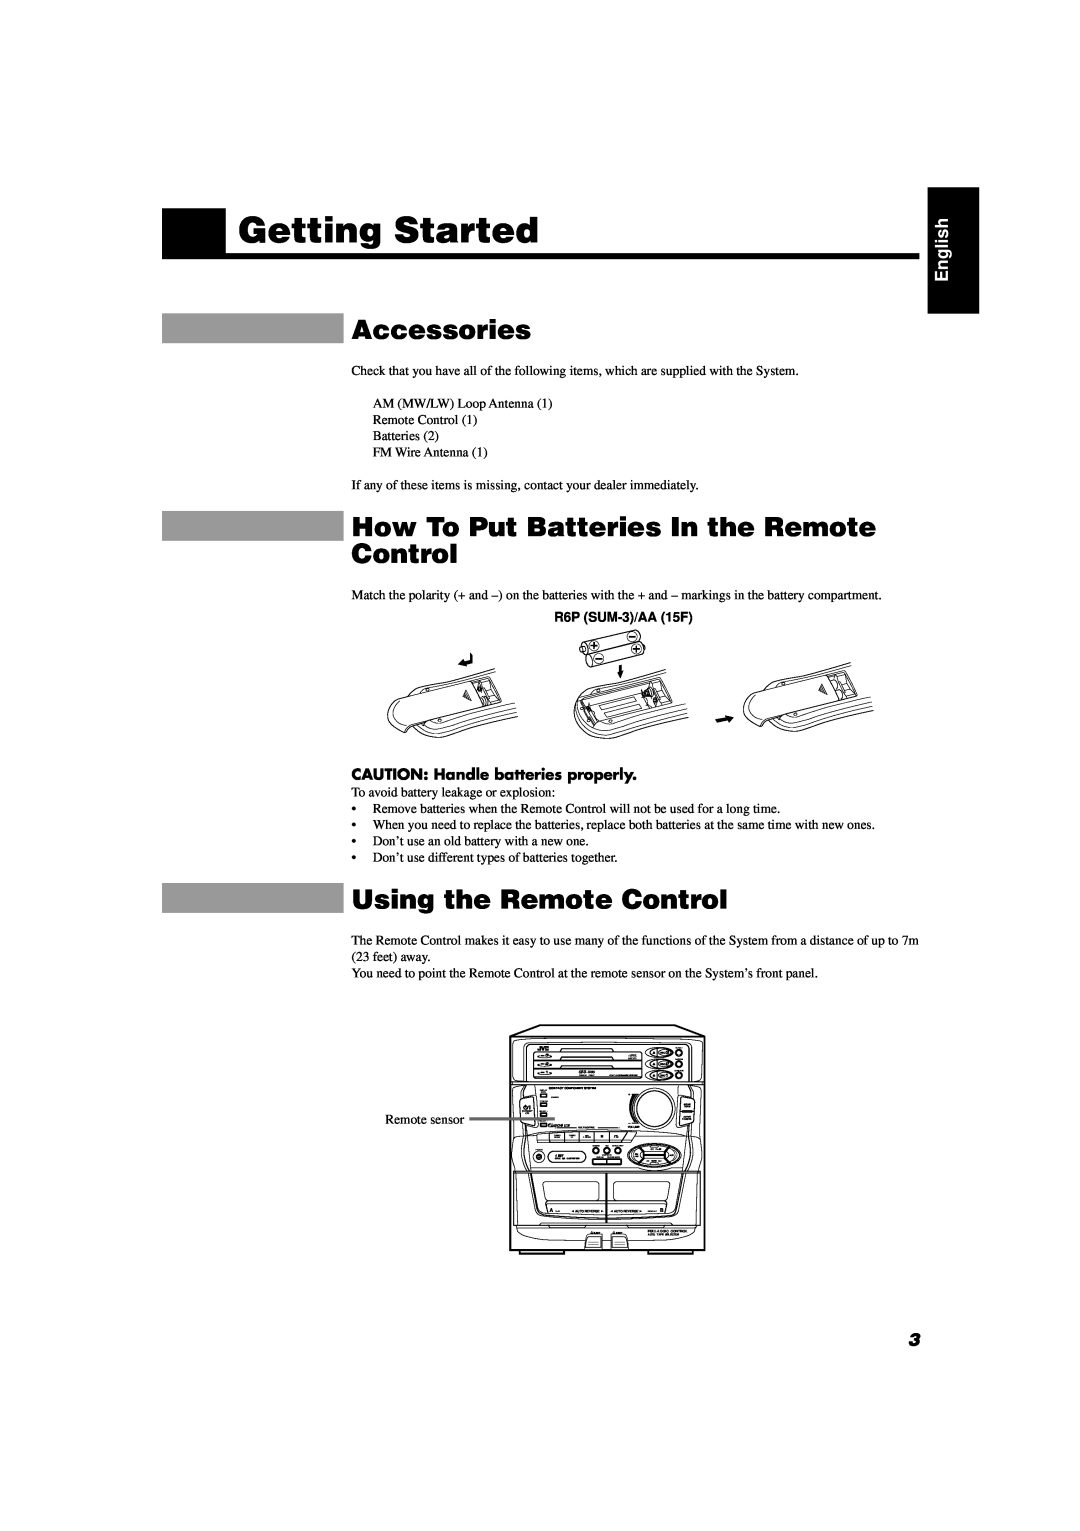 JVC CA-D351TR Getting Started, Accessories, How To Put Batteries In the Remote Control, Using the Remote Control, English 